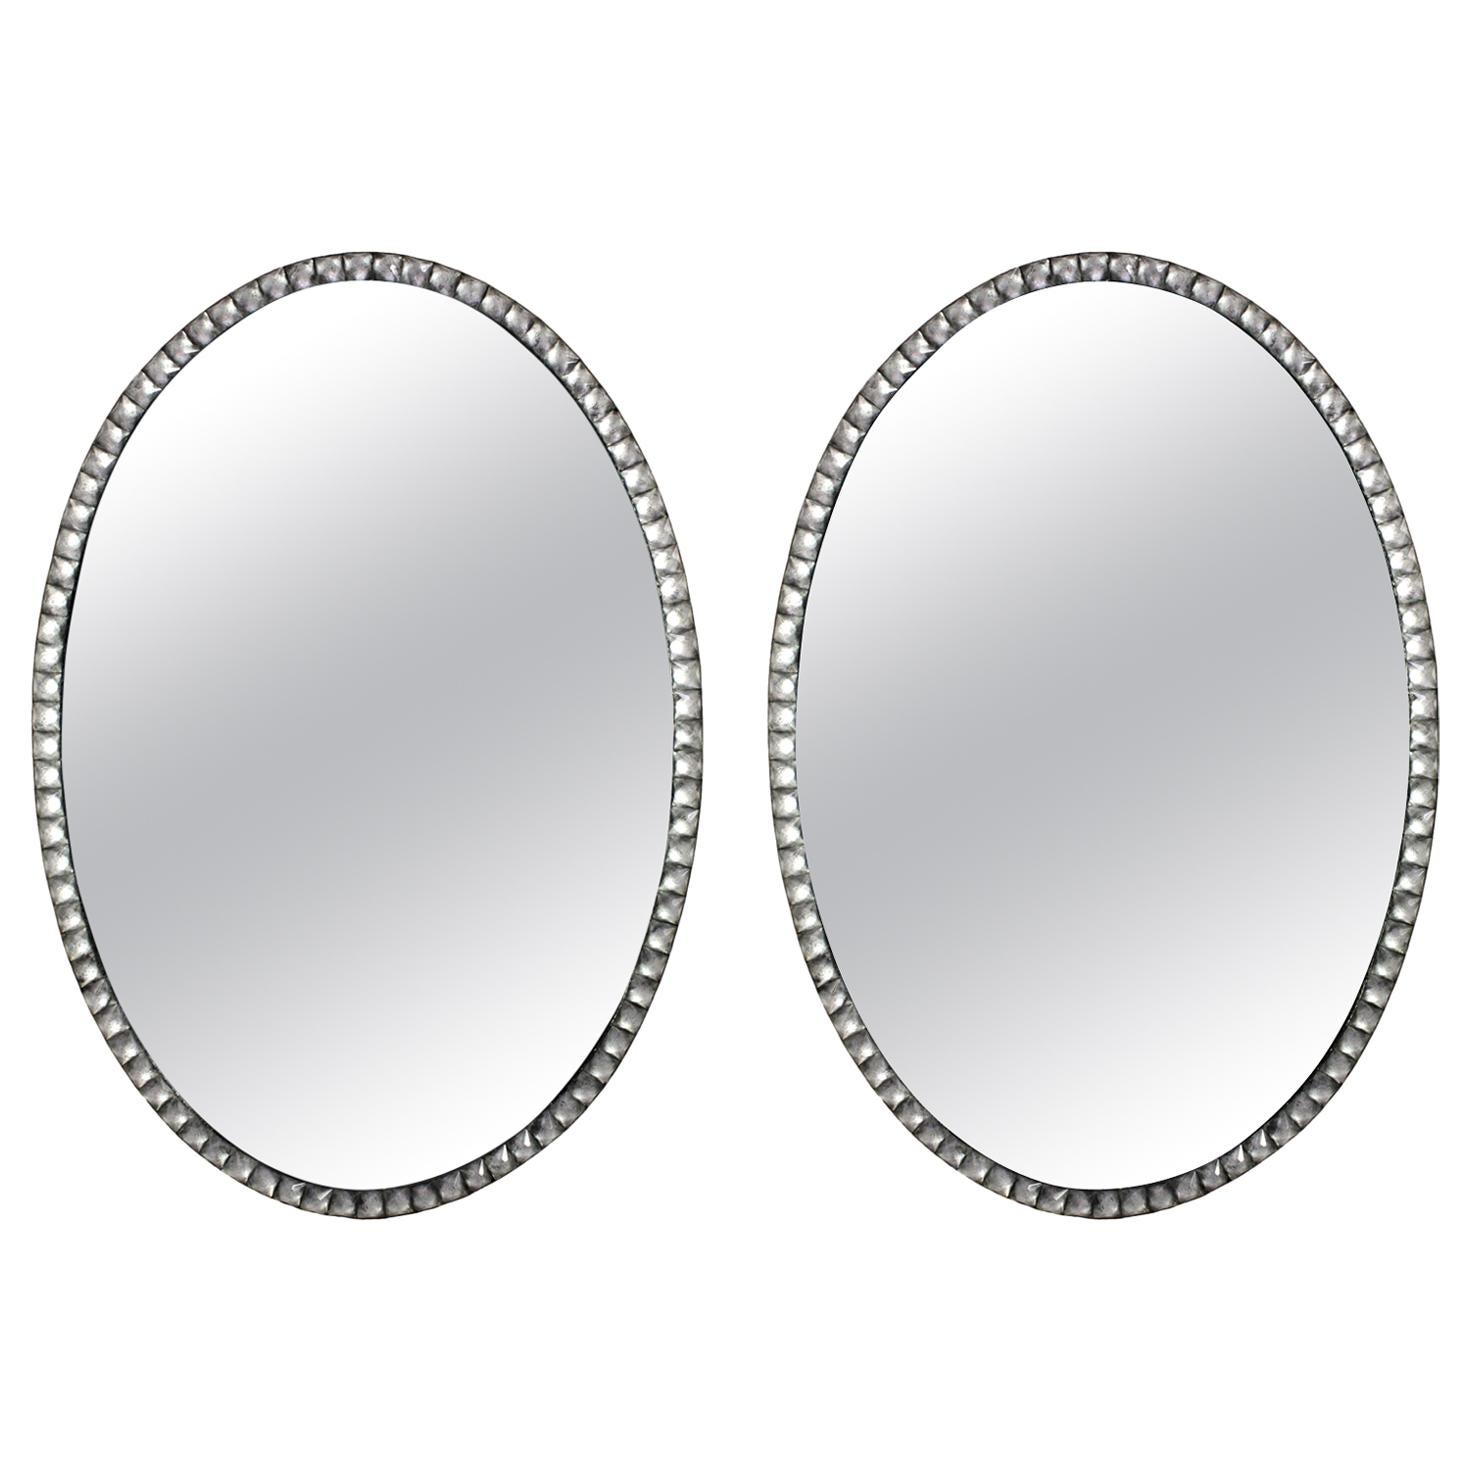 Pair of Georgian Style Irish Mirrors with Rock Crystal Faceted Borders